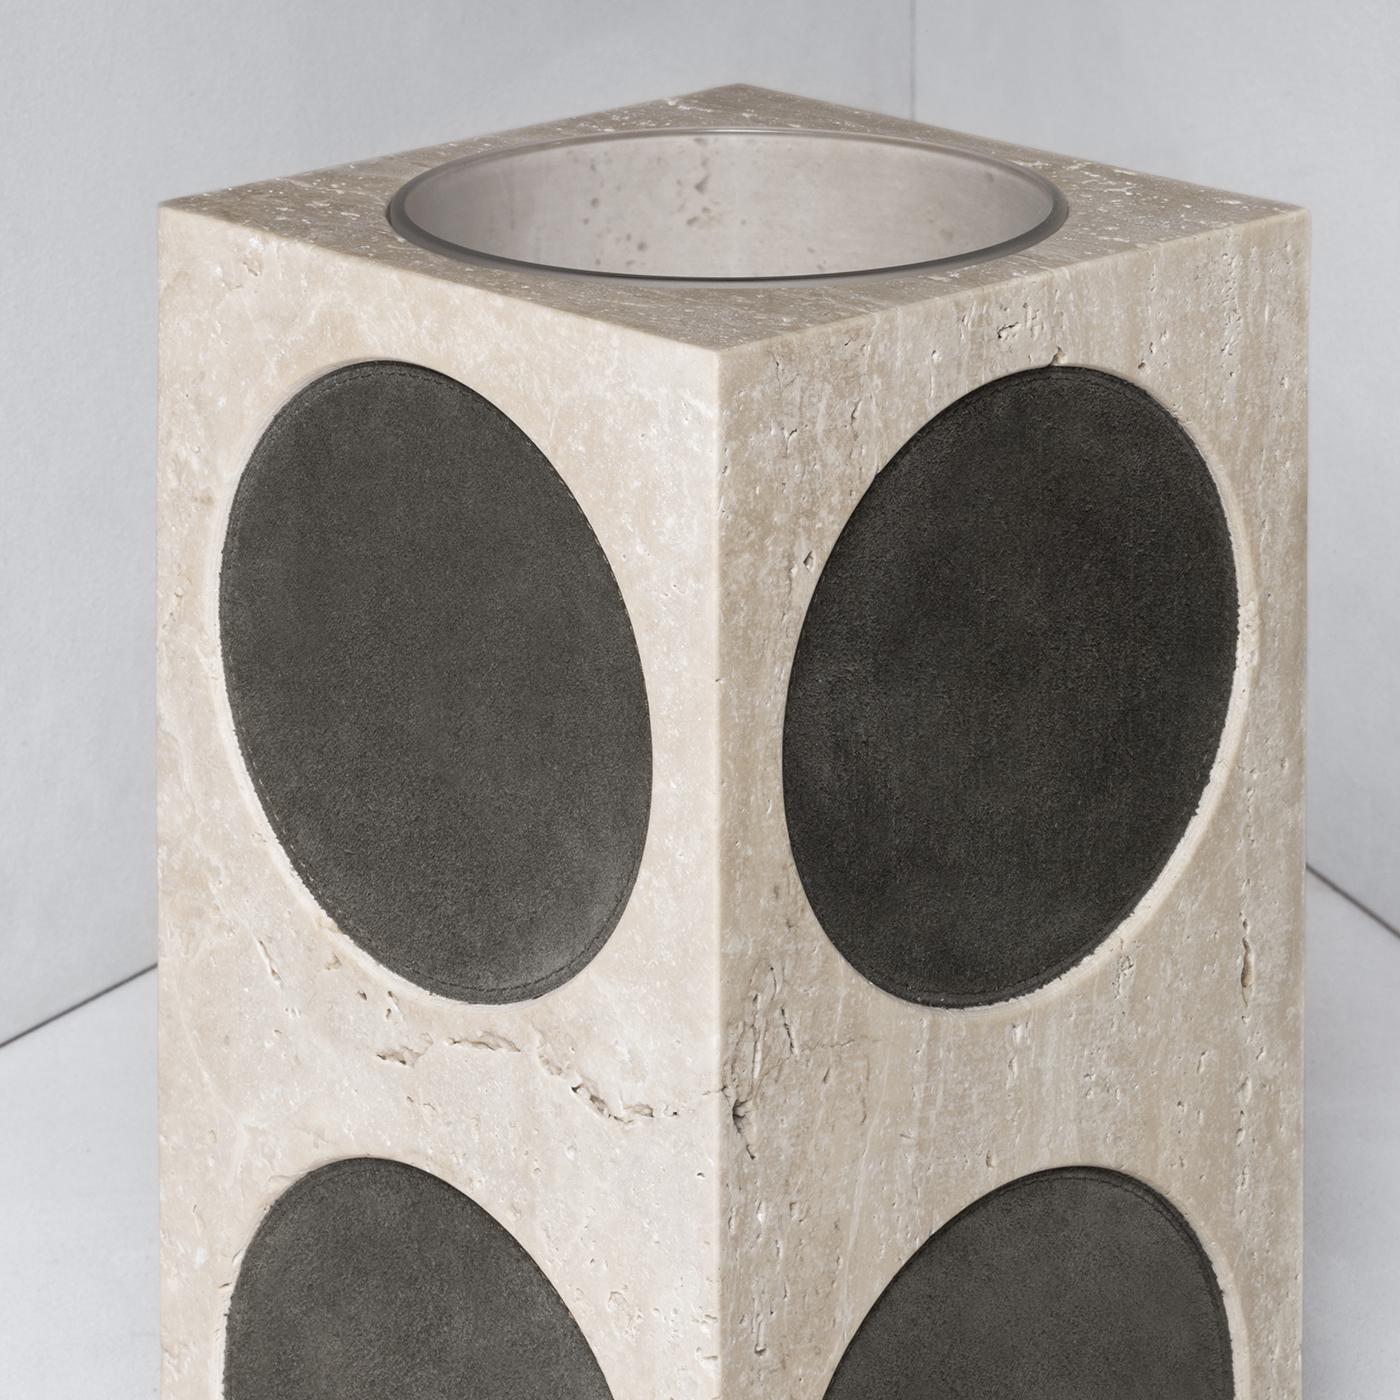 Perfect for flowers, this vase is a sophisticated accent on an entryway console or study desk. Made out of prized travertine beige limestone, the rectangular silhouette of this vase is accented with large circular inserts in black nappa leather on